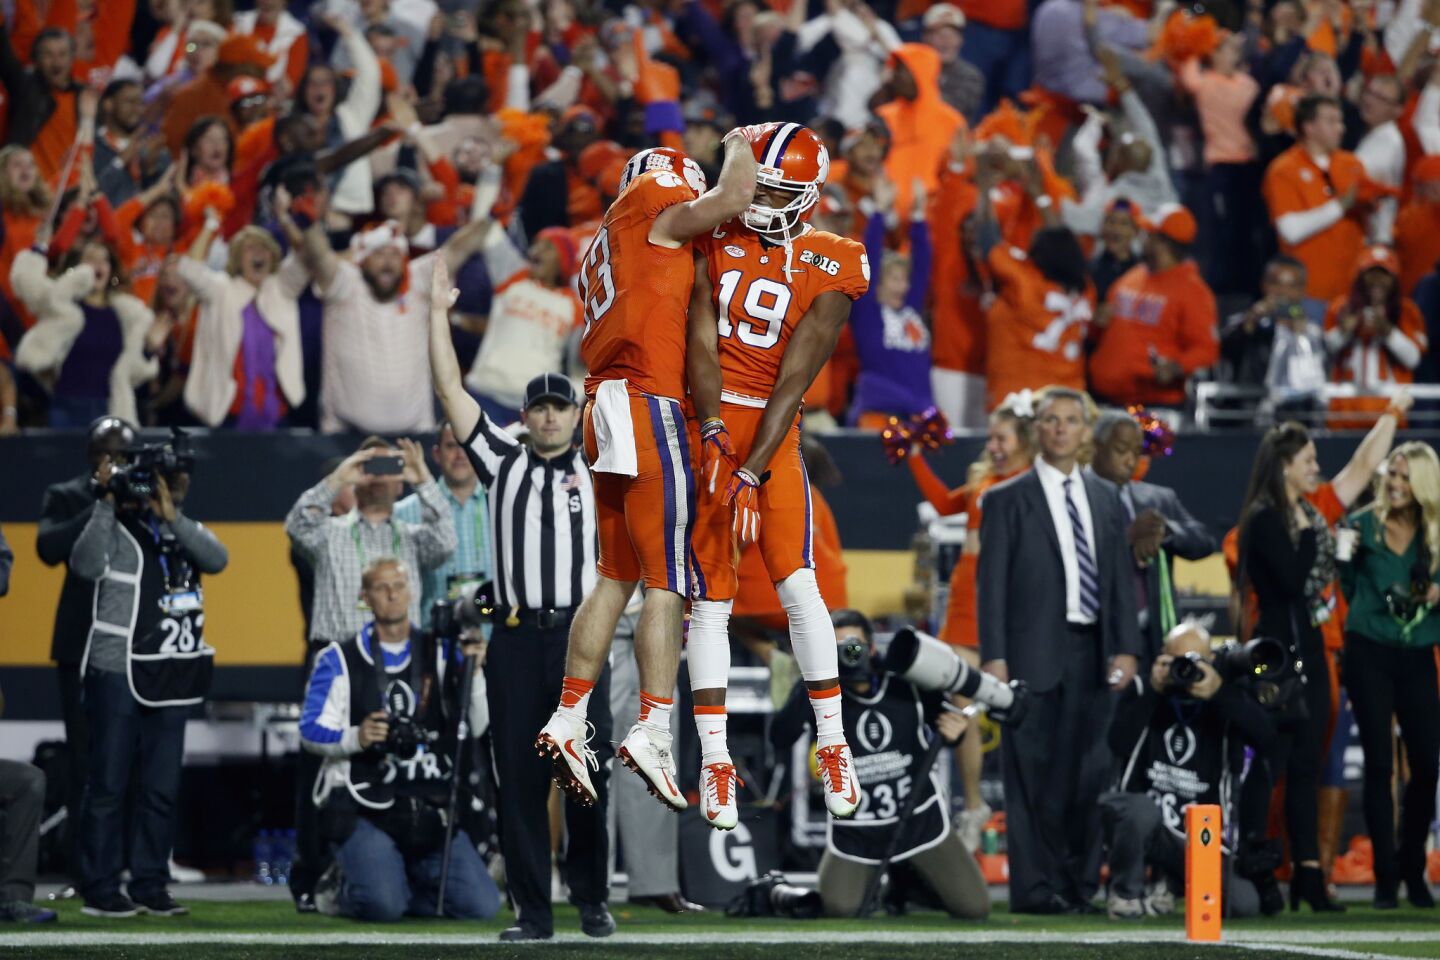 Clemson receiver Hunter Renfrow celebrates with his teammate Charone Peake after scoring a 31-yard touchdown pass in the first quarter.